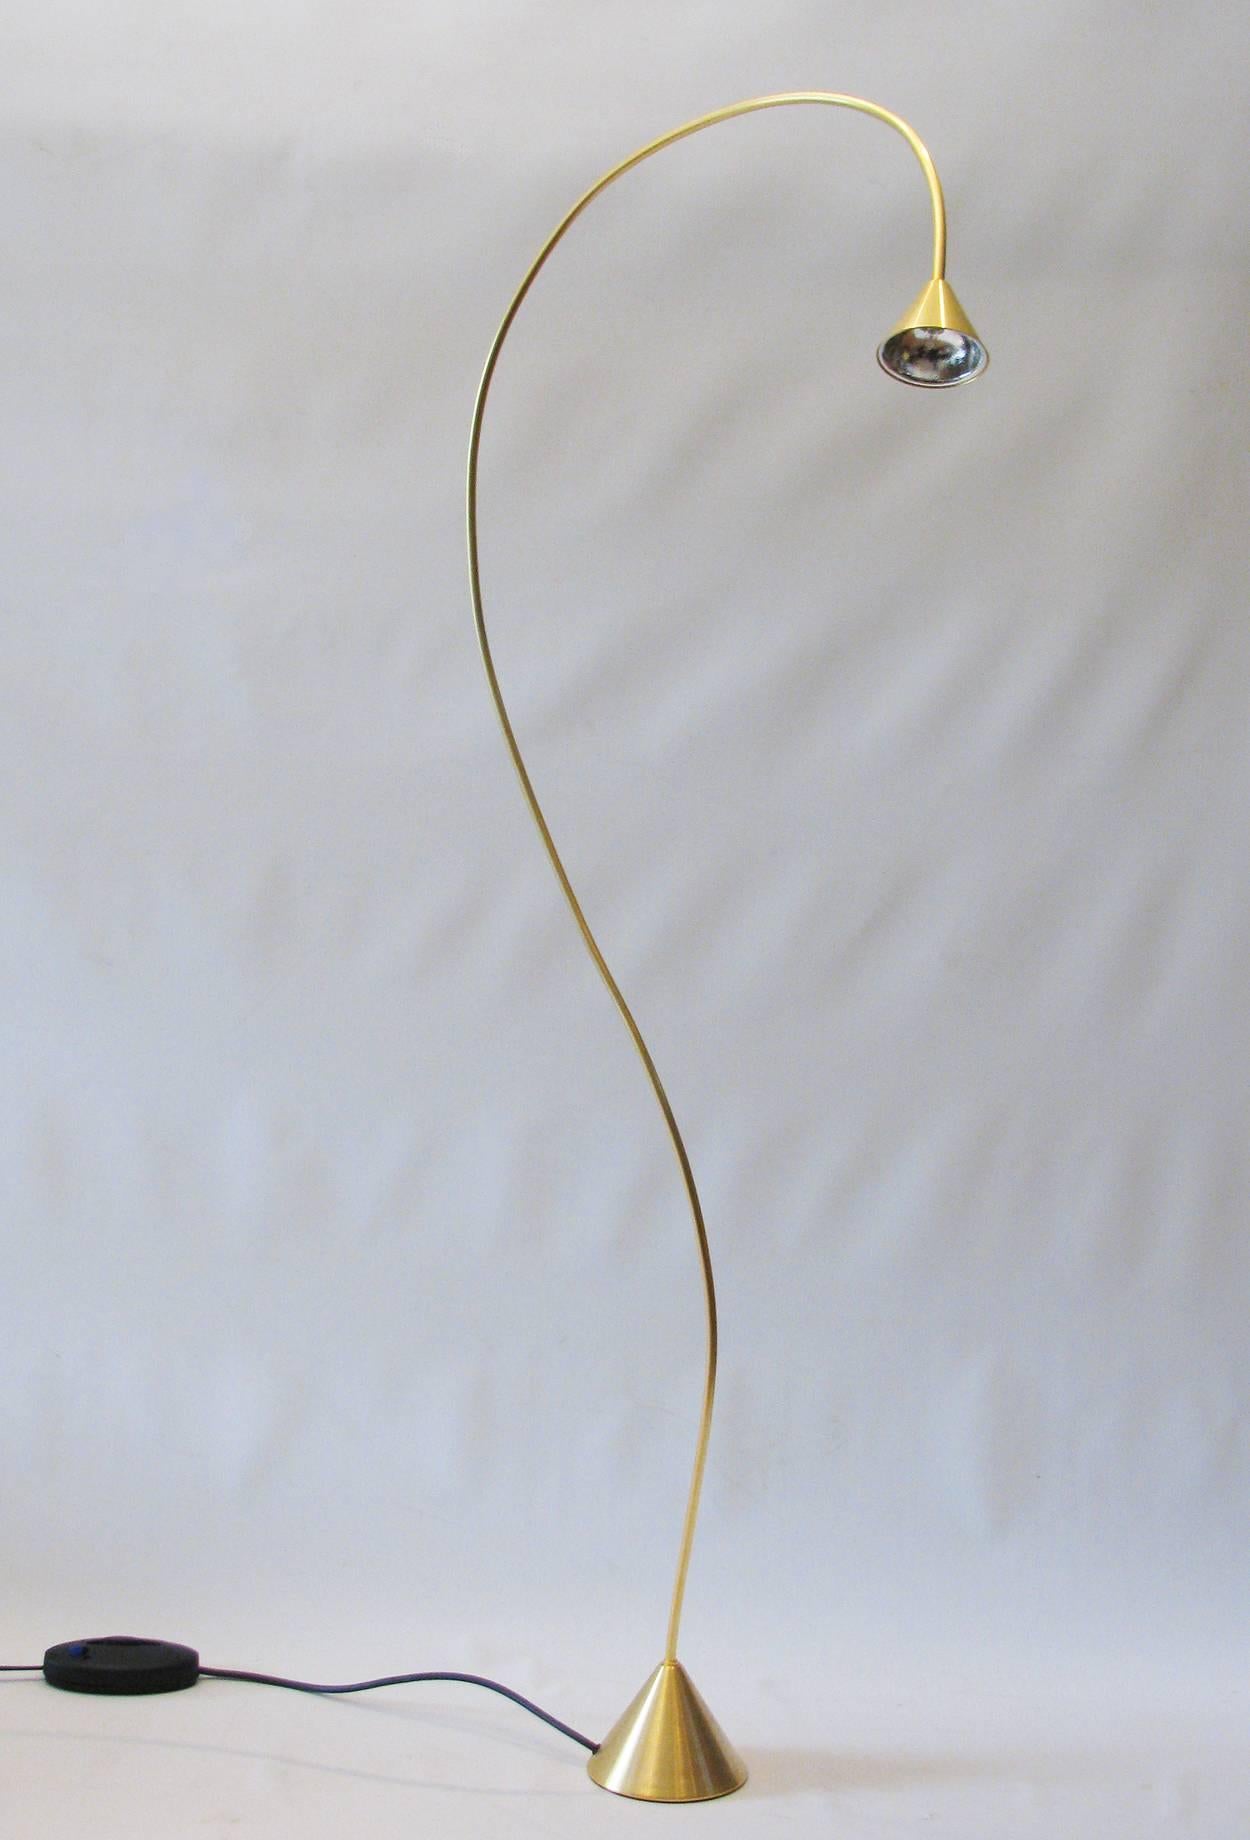 Papiro is an organic form adjustable floor lamp with a sculptural design. Designed by Sergio Calatroni in 1988. This contemporary gold finish lamp is manufactured by the Italian lighting manufacturer Pallucco, Milan. The thin light arm is